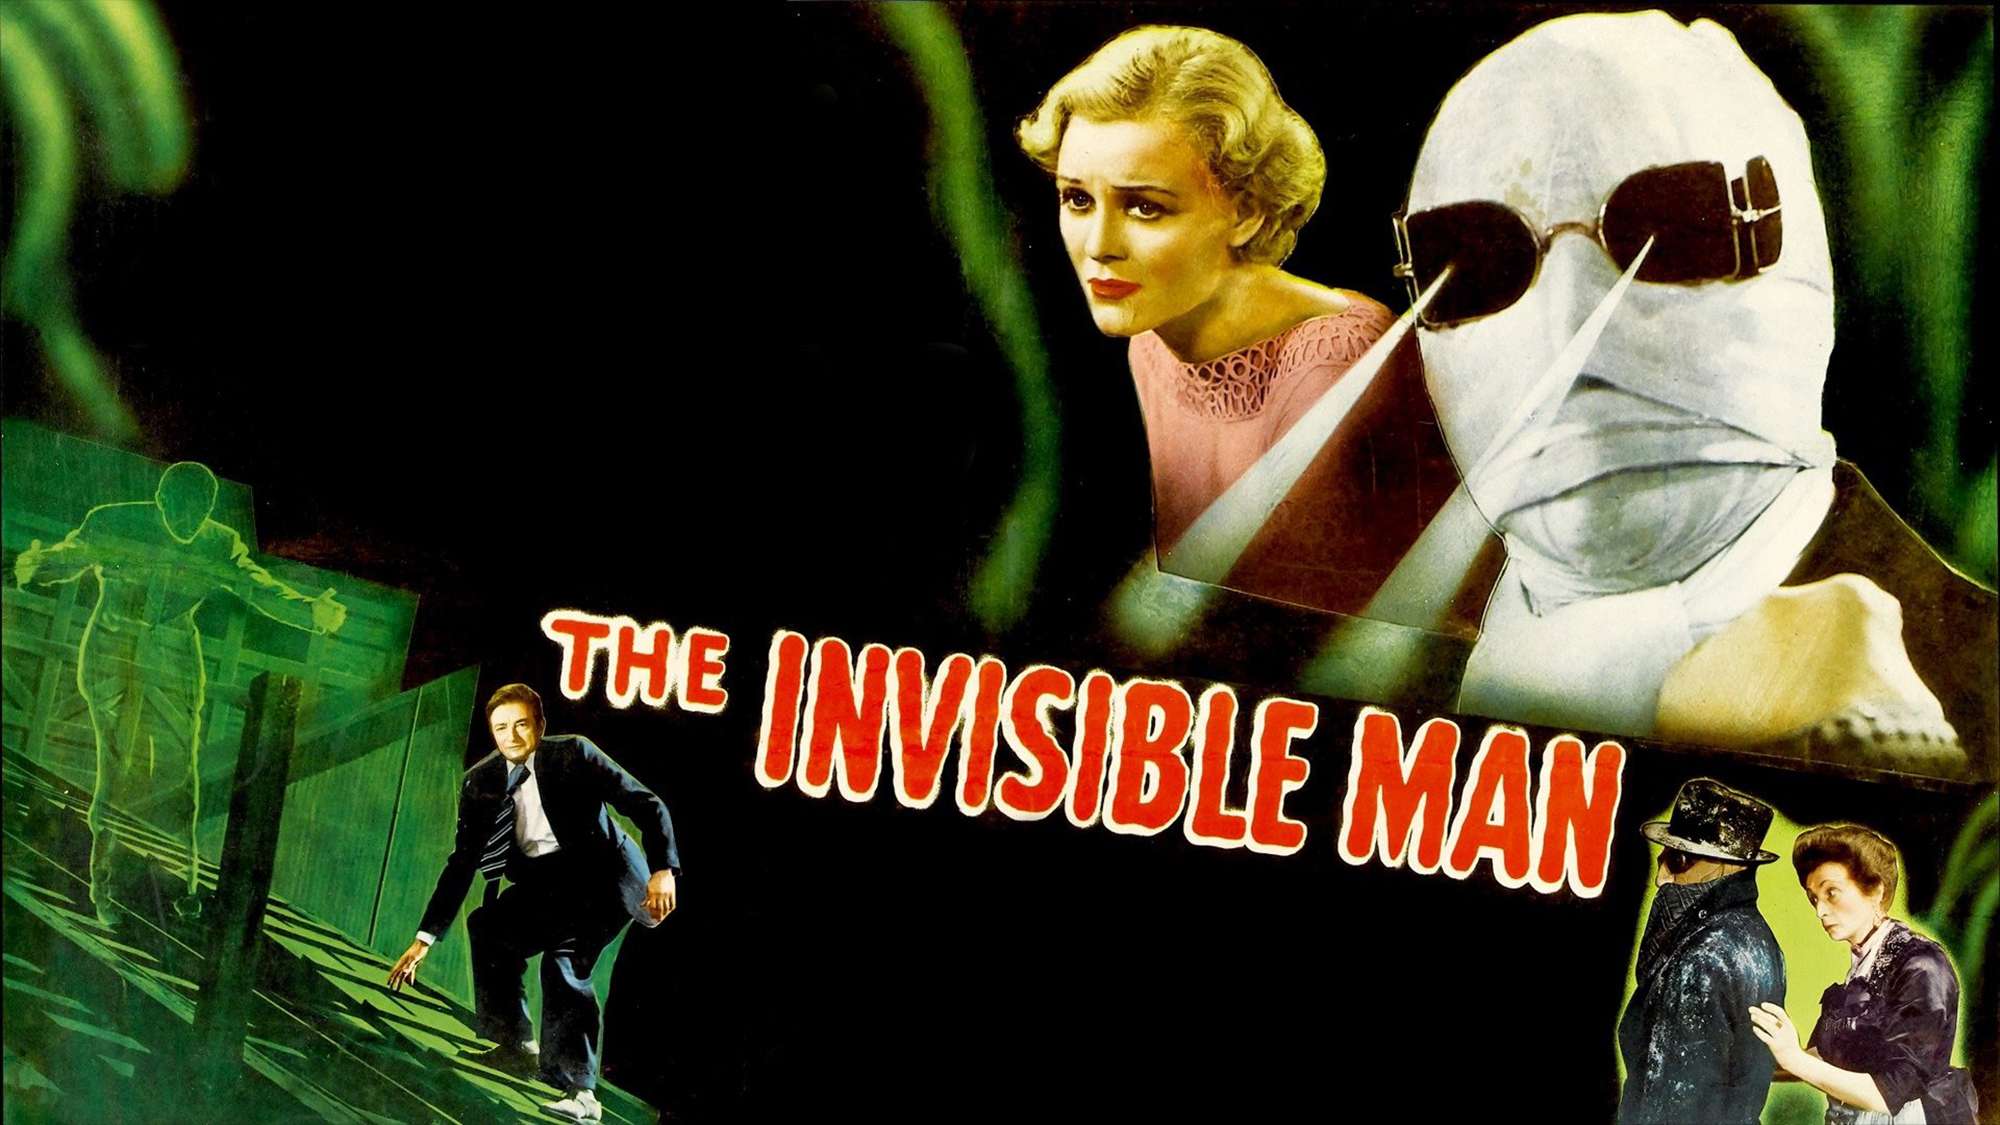 The Invisible man 1933 Wallpaper